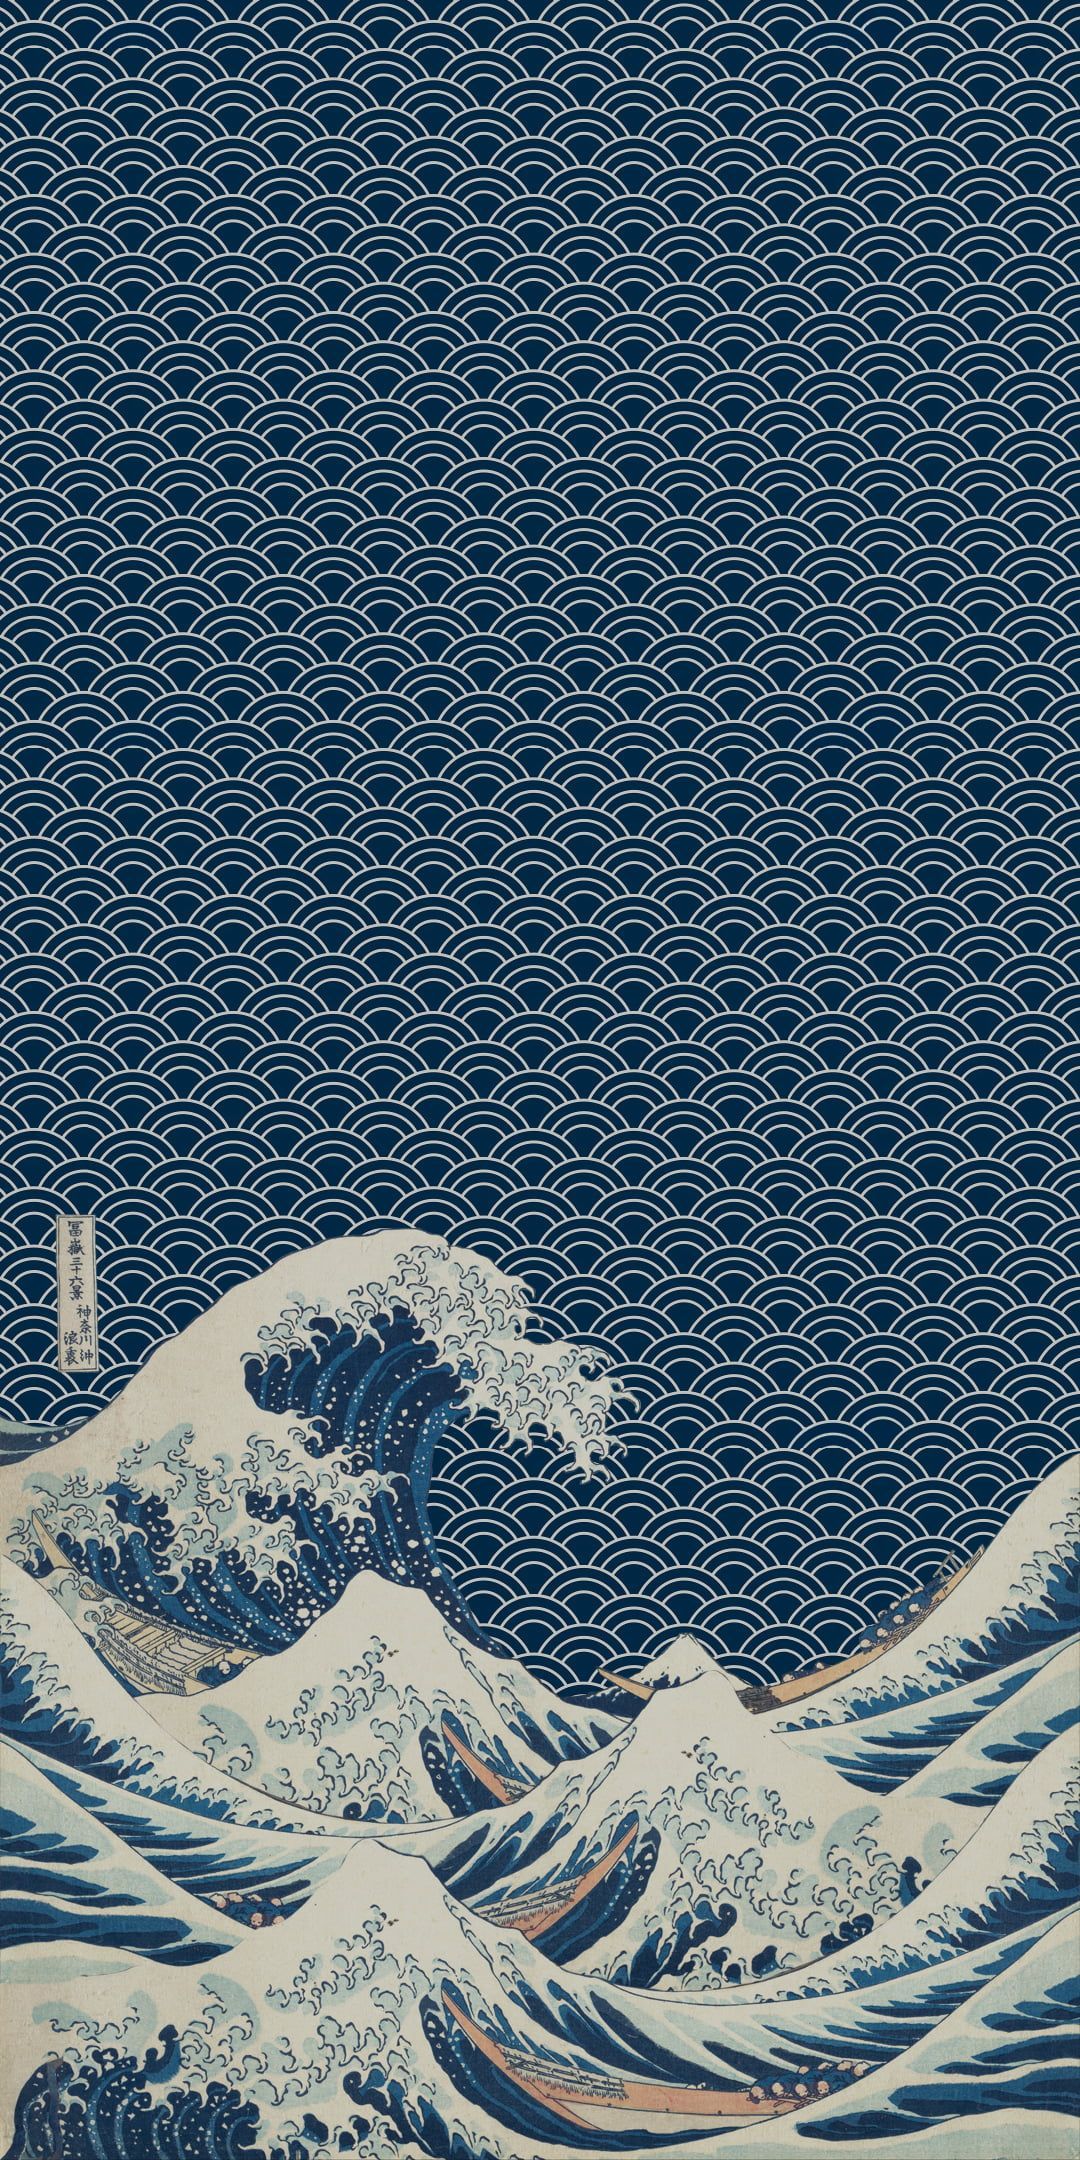 A wave in the ocean, inspired by the artwork of Hokusai - The Great Wave off Kanagawa